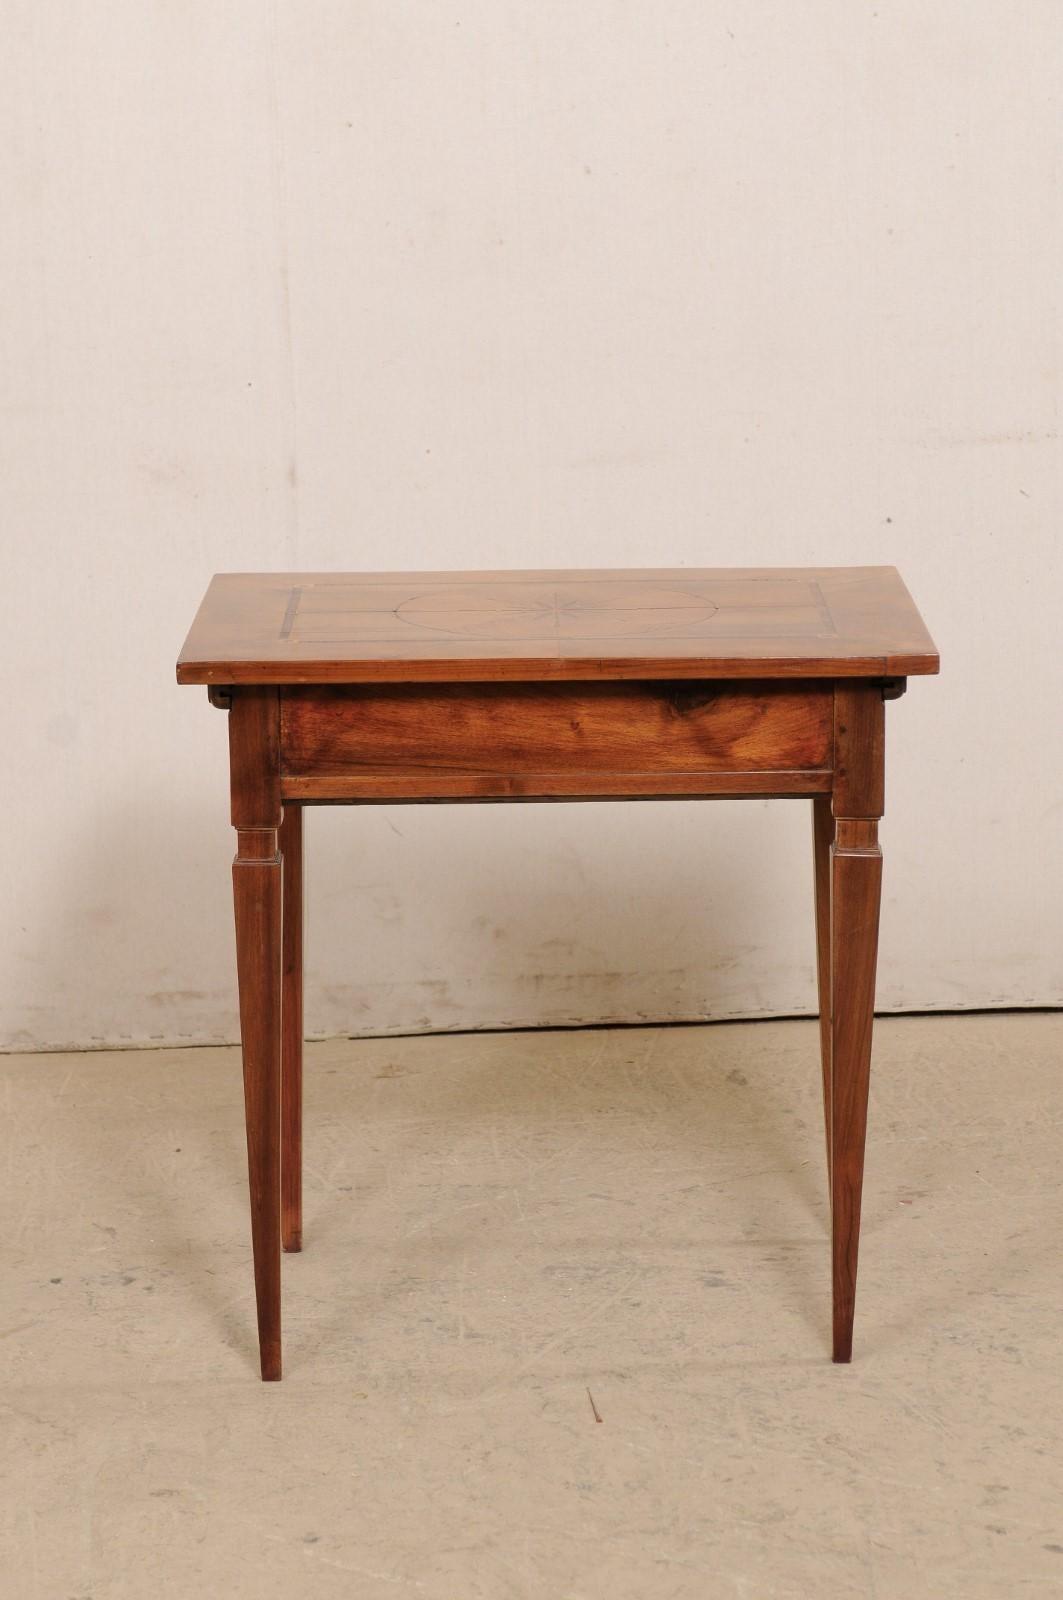 19th C. Italian Writing Desk w/Decorative Inlay & Sliding Top for Hidden Storage For Sale 2